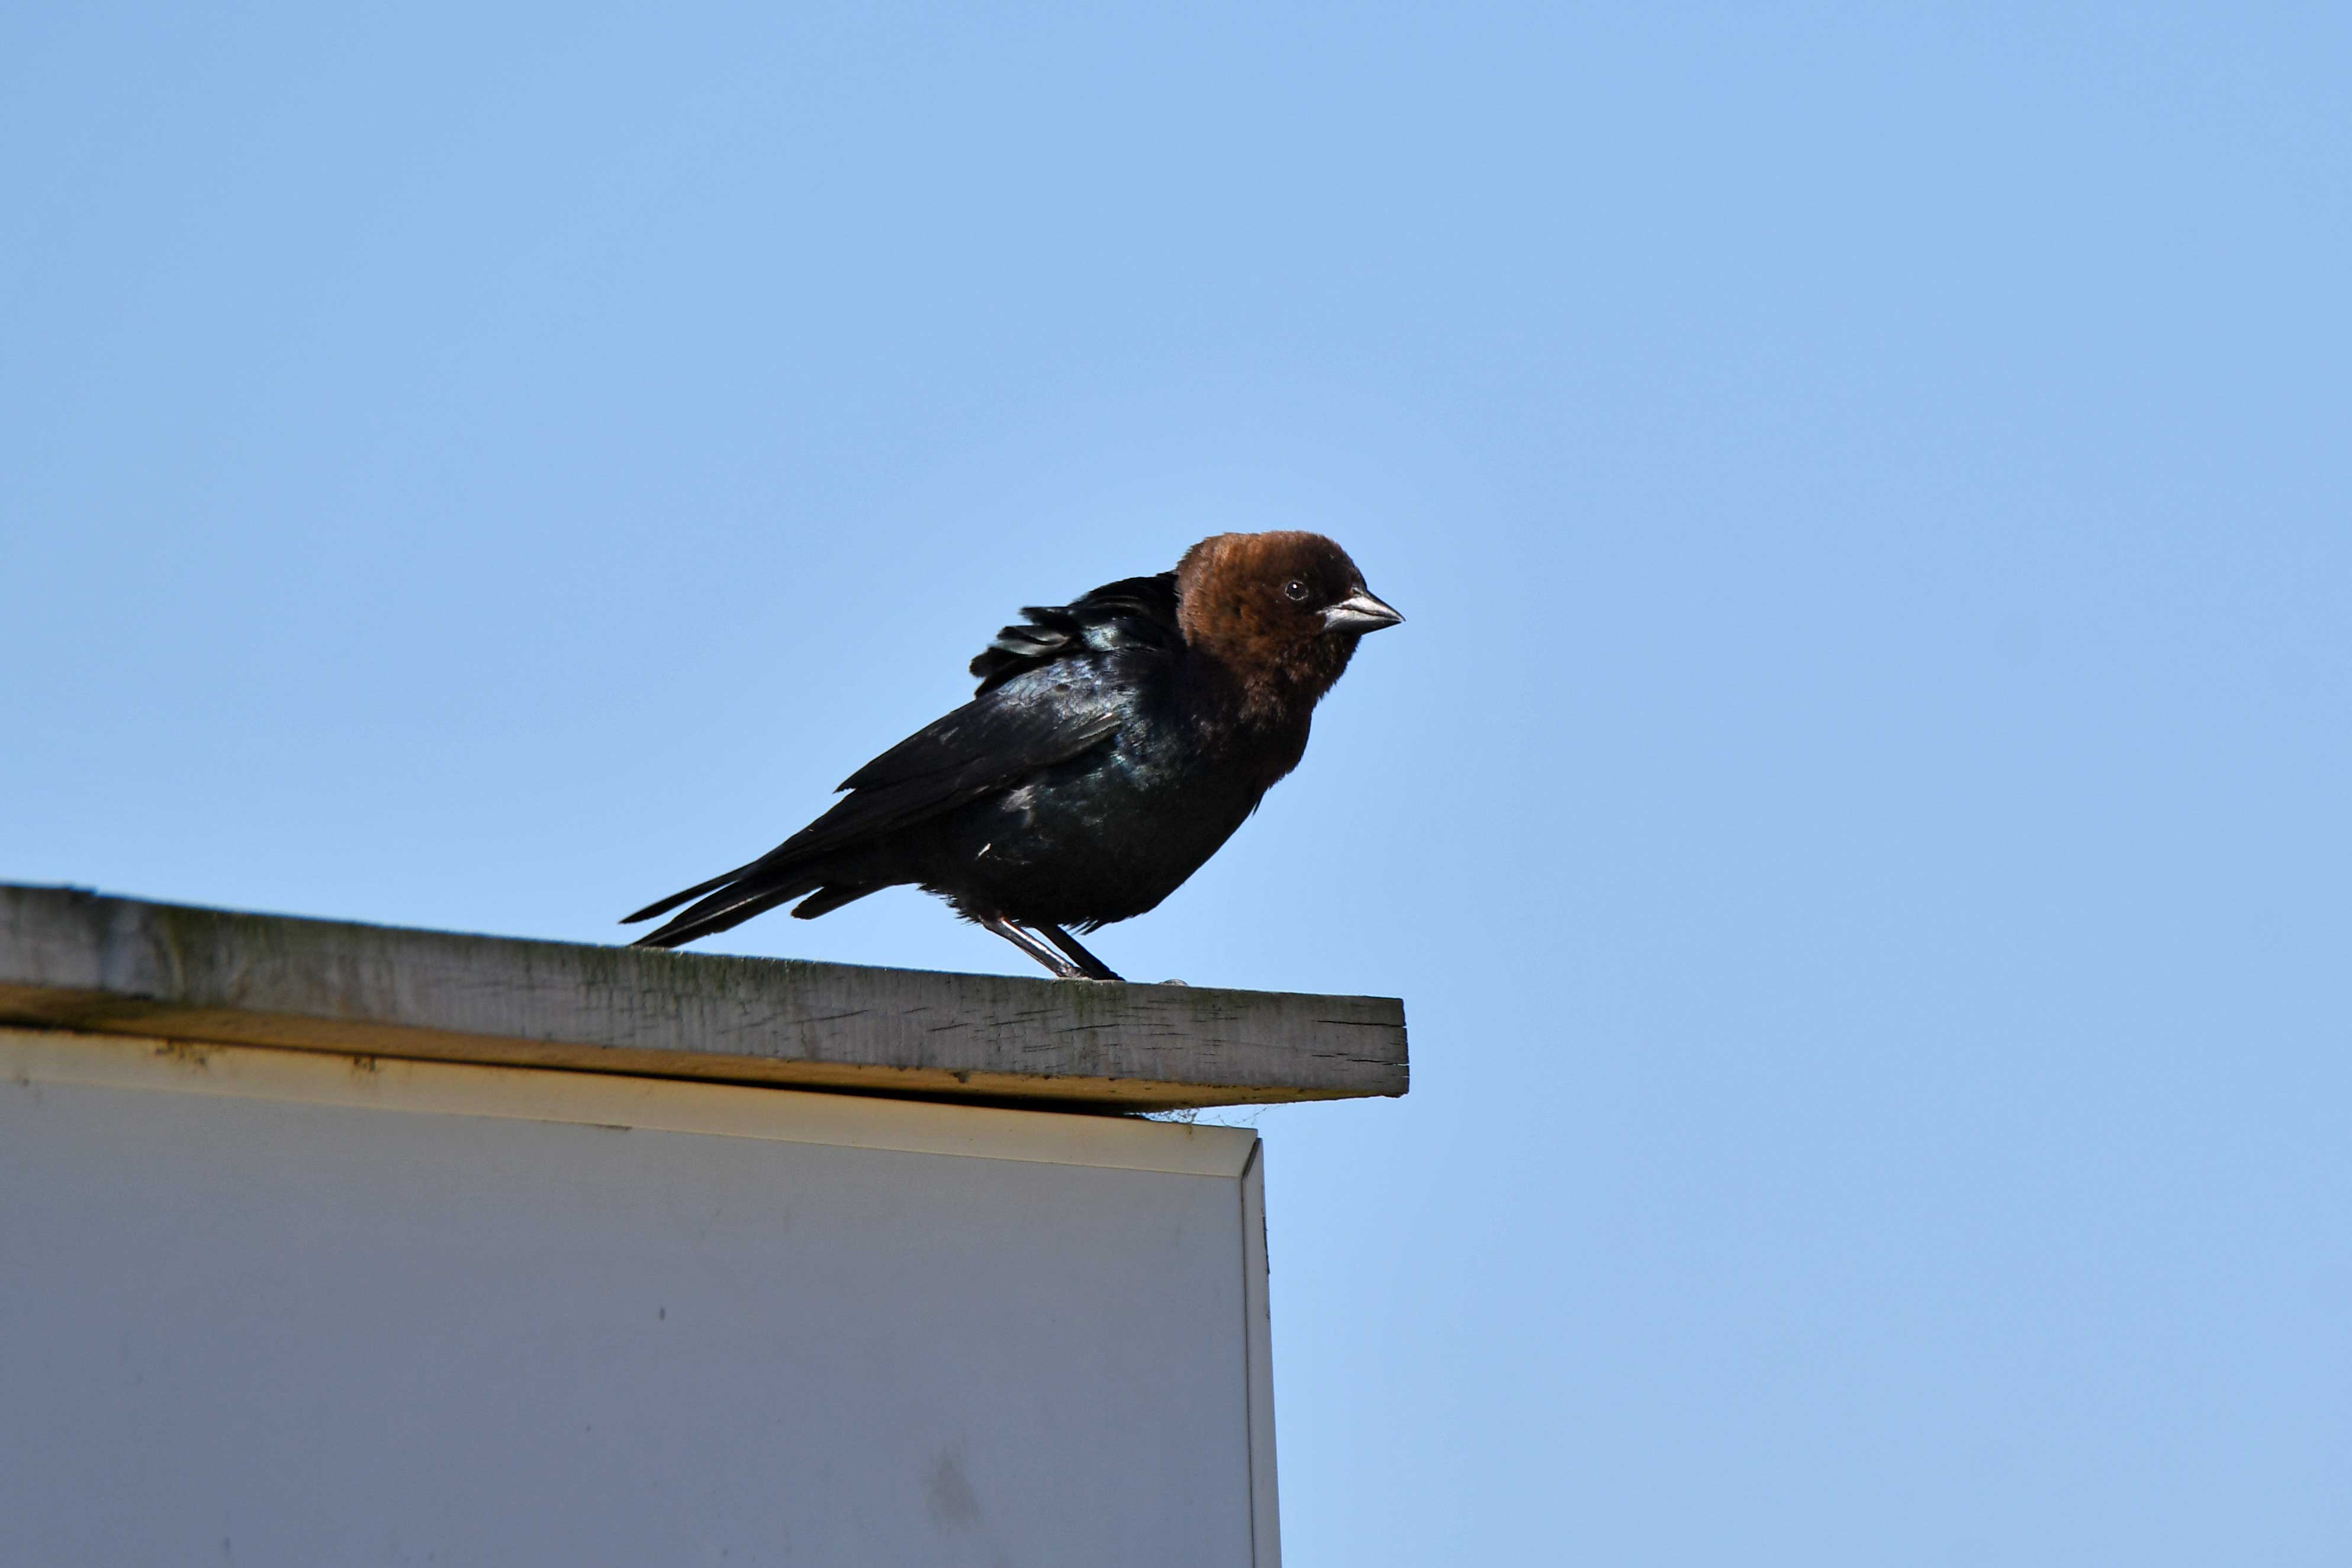 Brown-headed cowbird on a building.